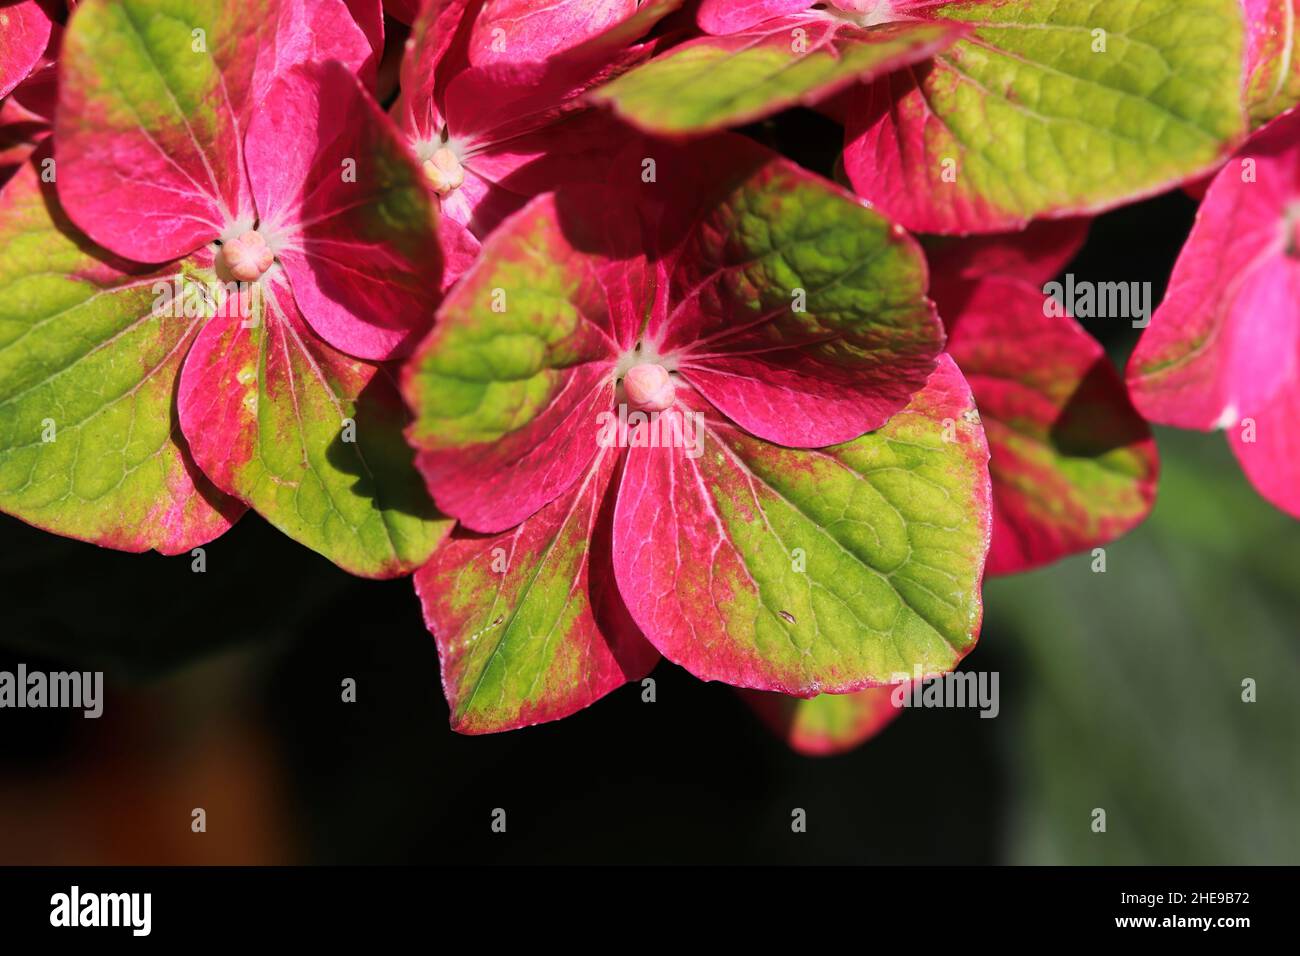 Delicate green and pink flowers on a Hydrangea plant Stock Photo